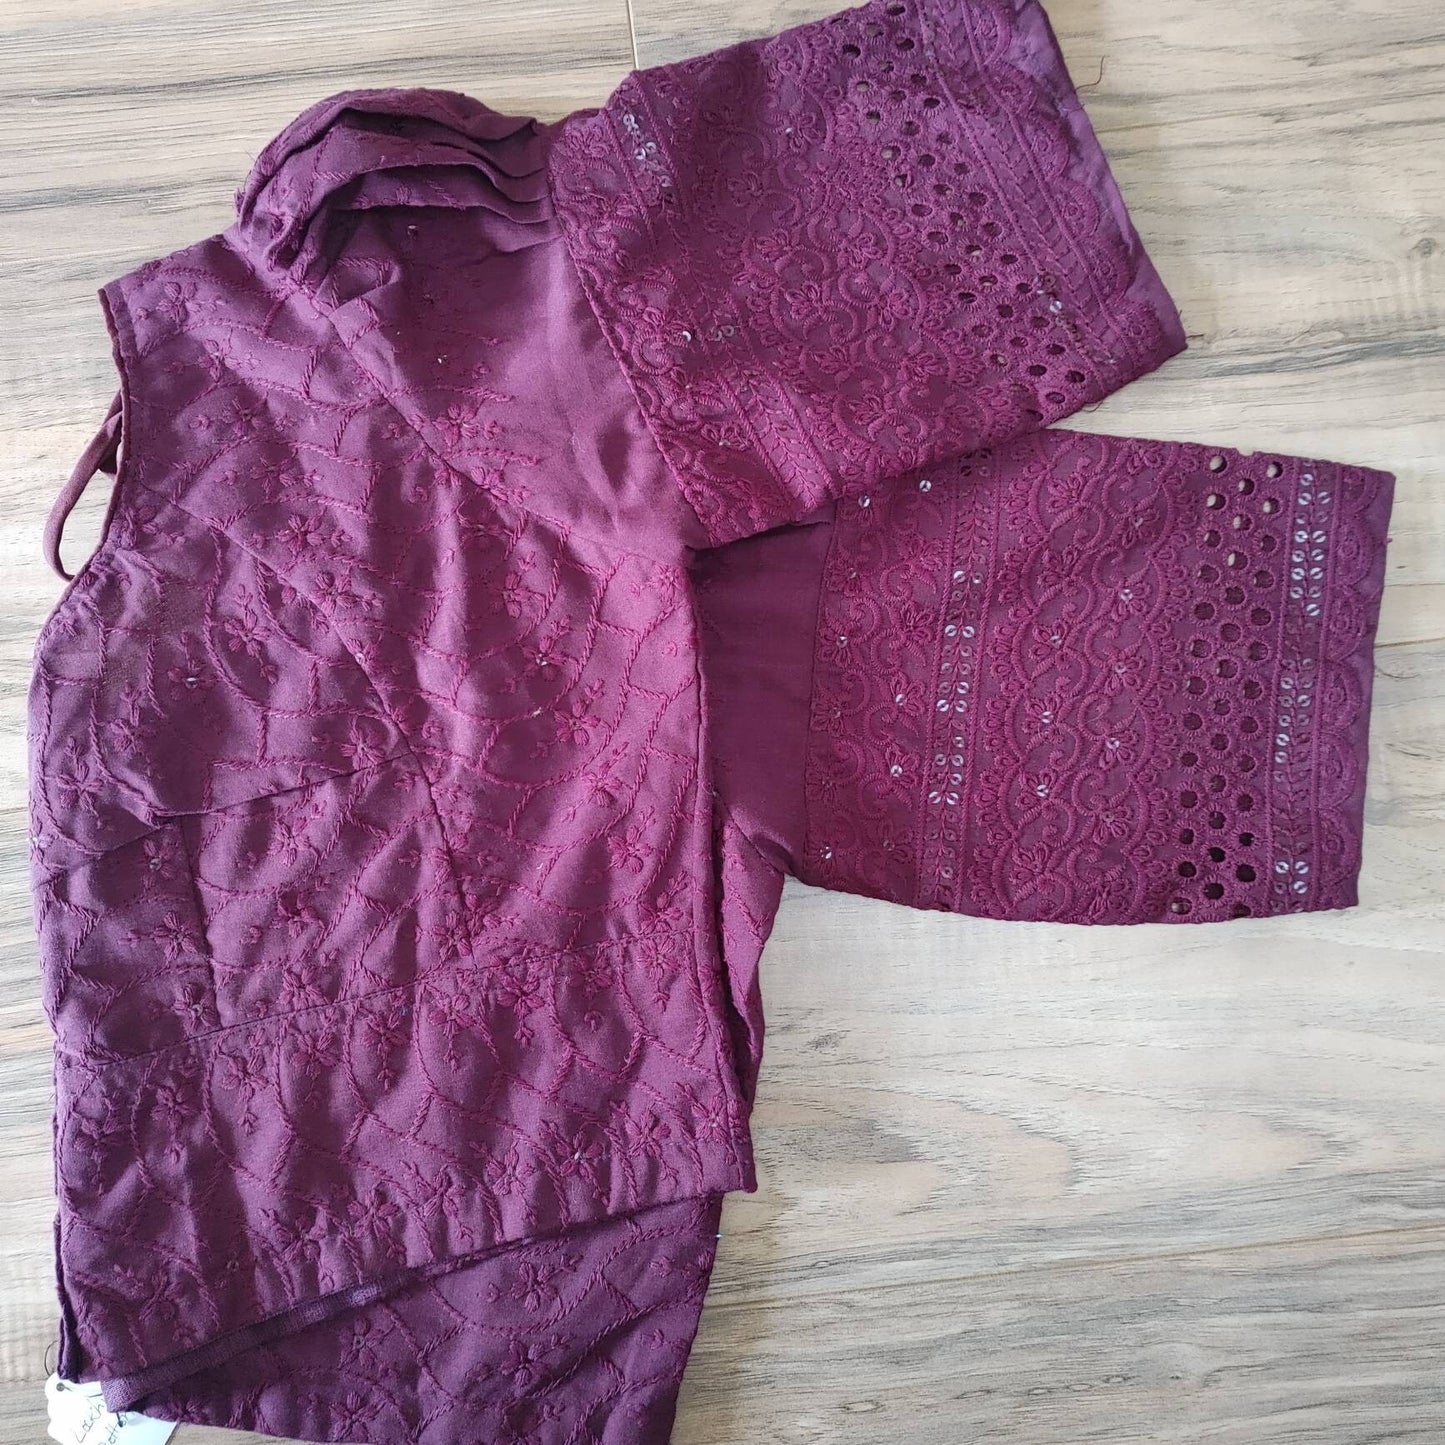 Readymade Lakhnaw Cotton Blouse, Plum Color Readymade Designer Blouse, Embroidered, Comfortable, goes with any contrast saree of your closet